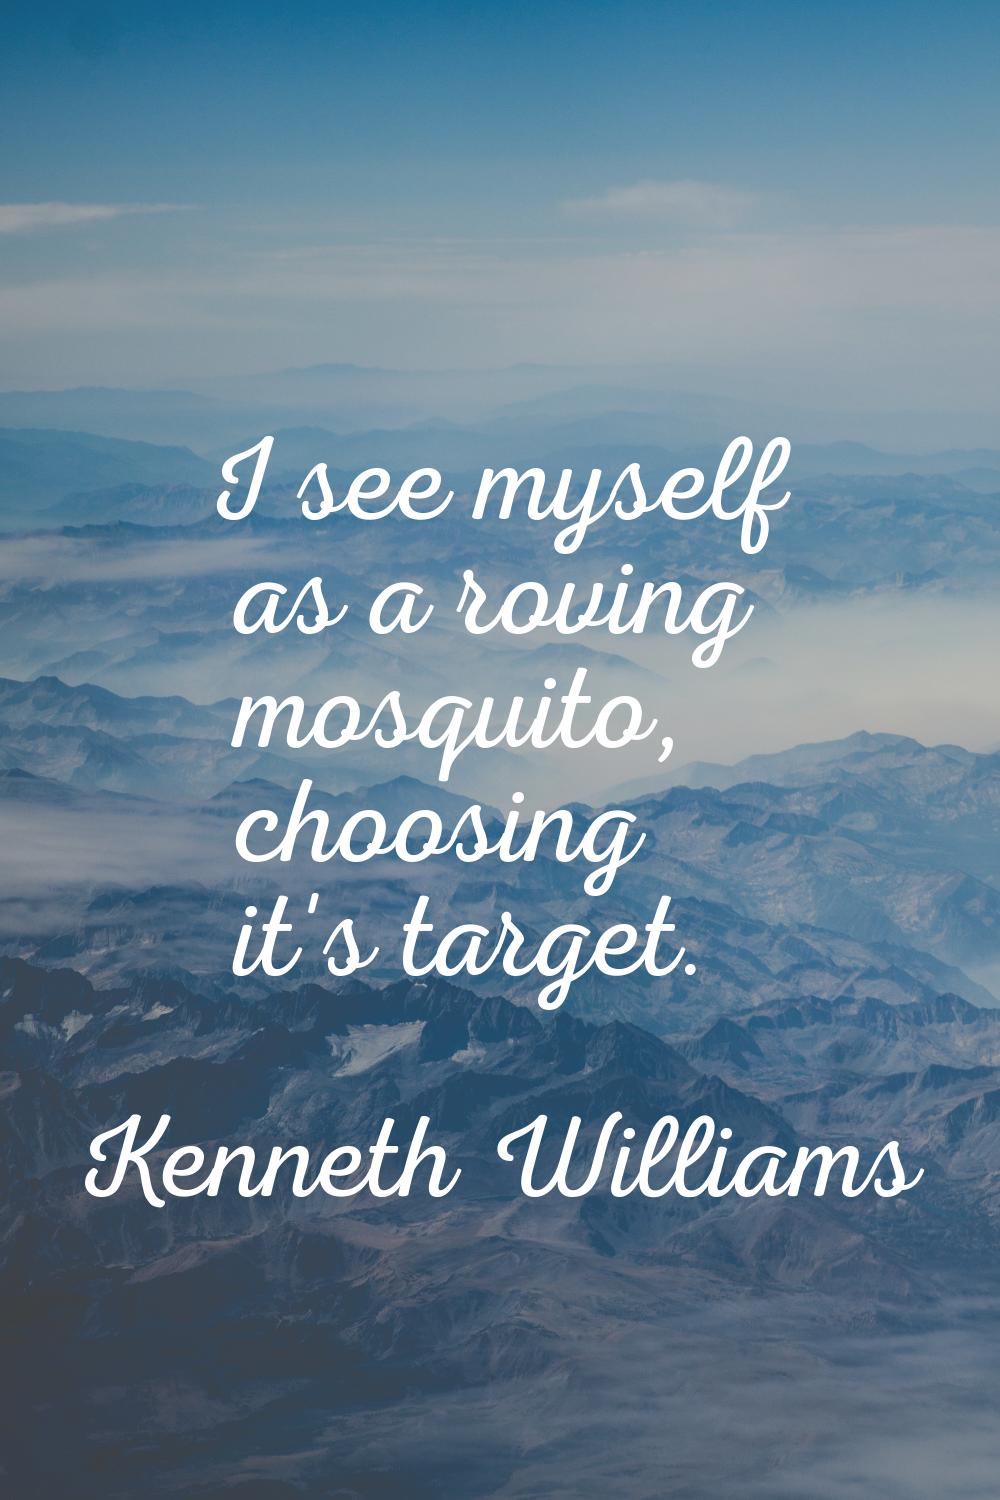 I see myself as a roving mosquito, choosing it's target.